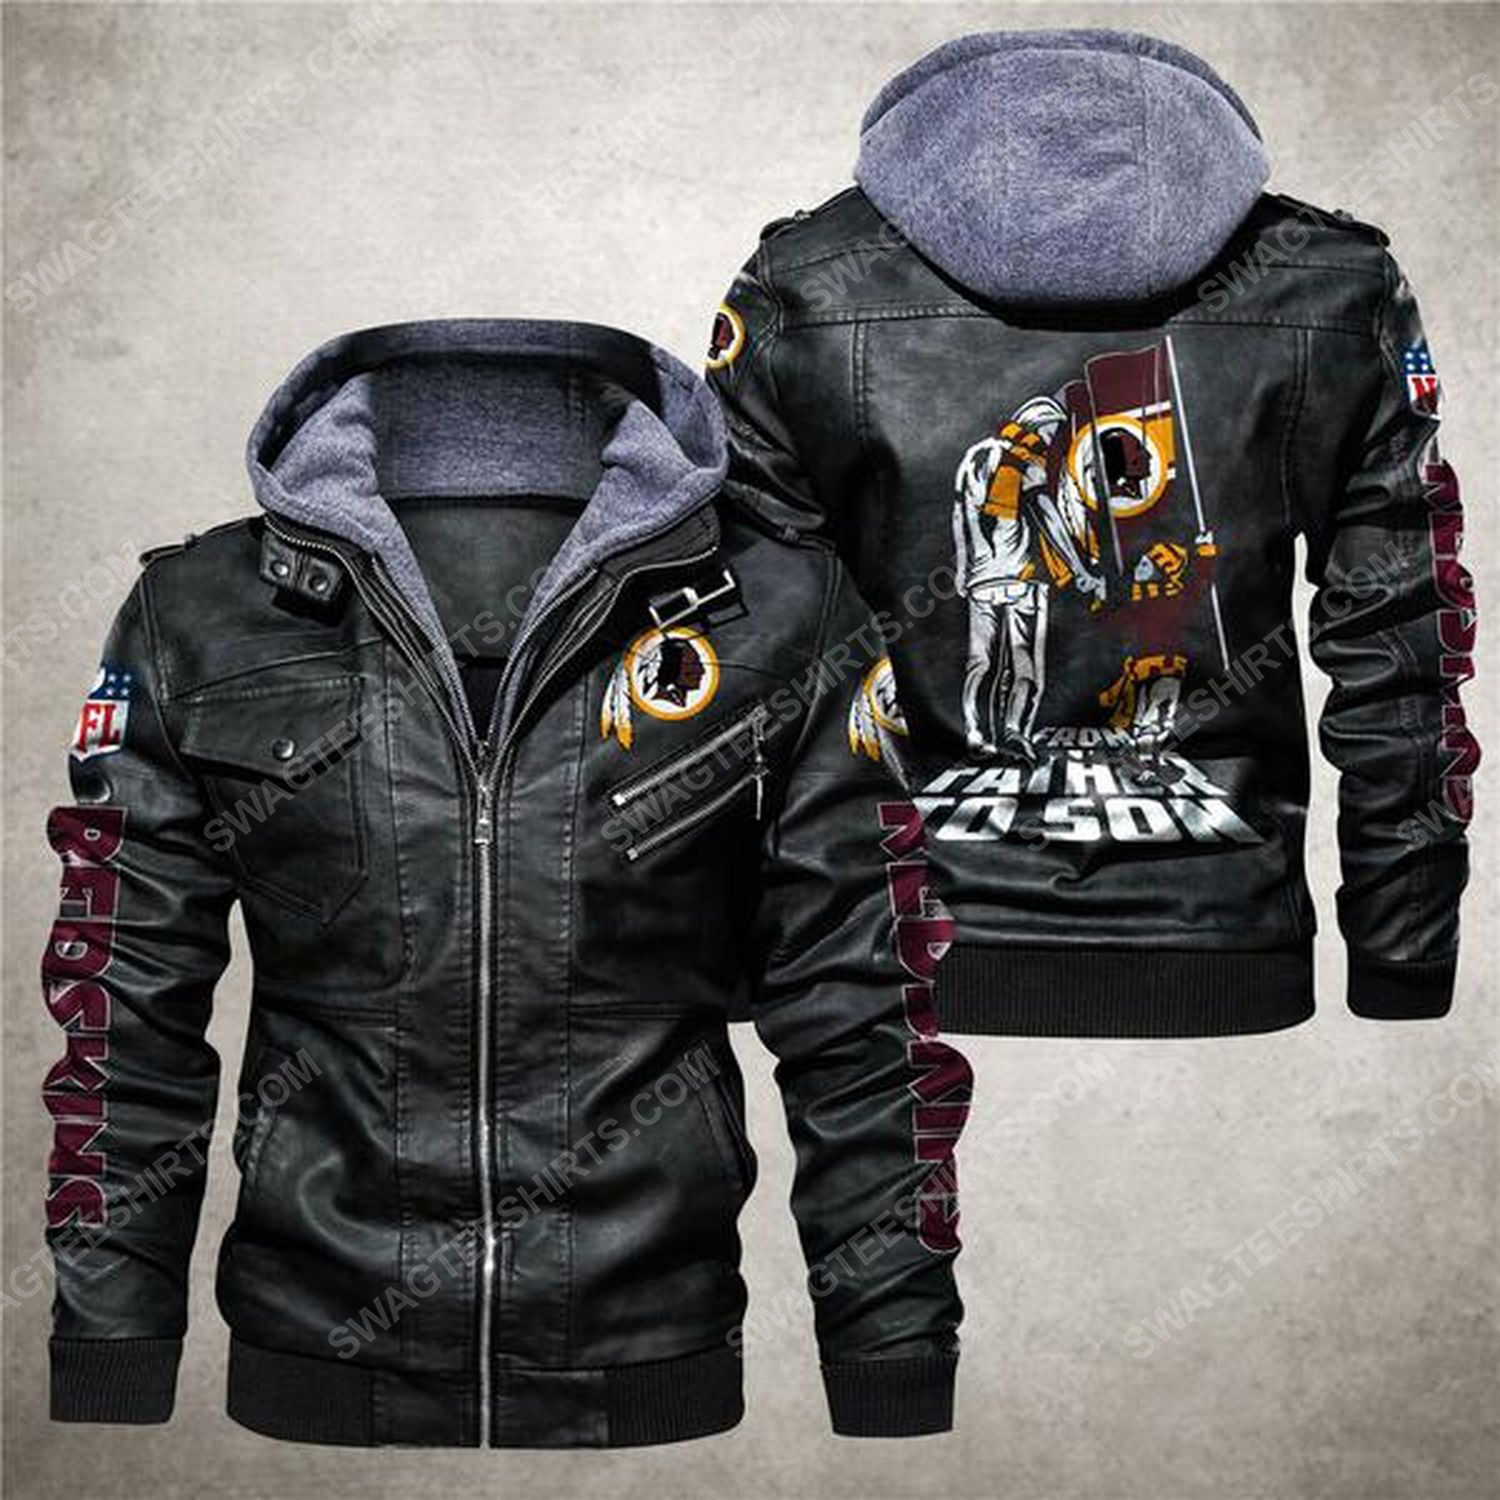 [special edition] National football league washington redskins from father to son leather jacket – Maria